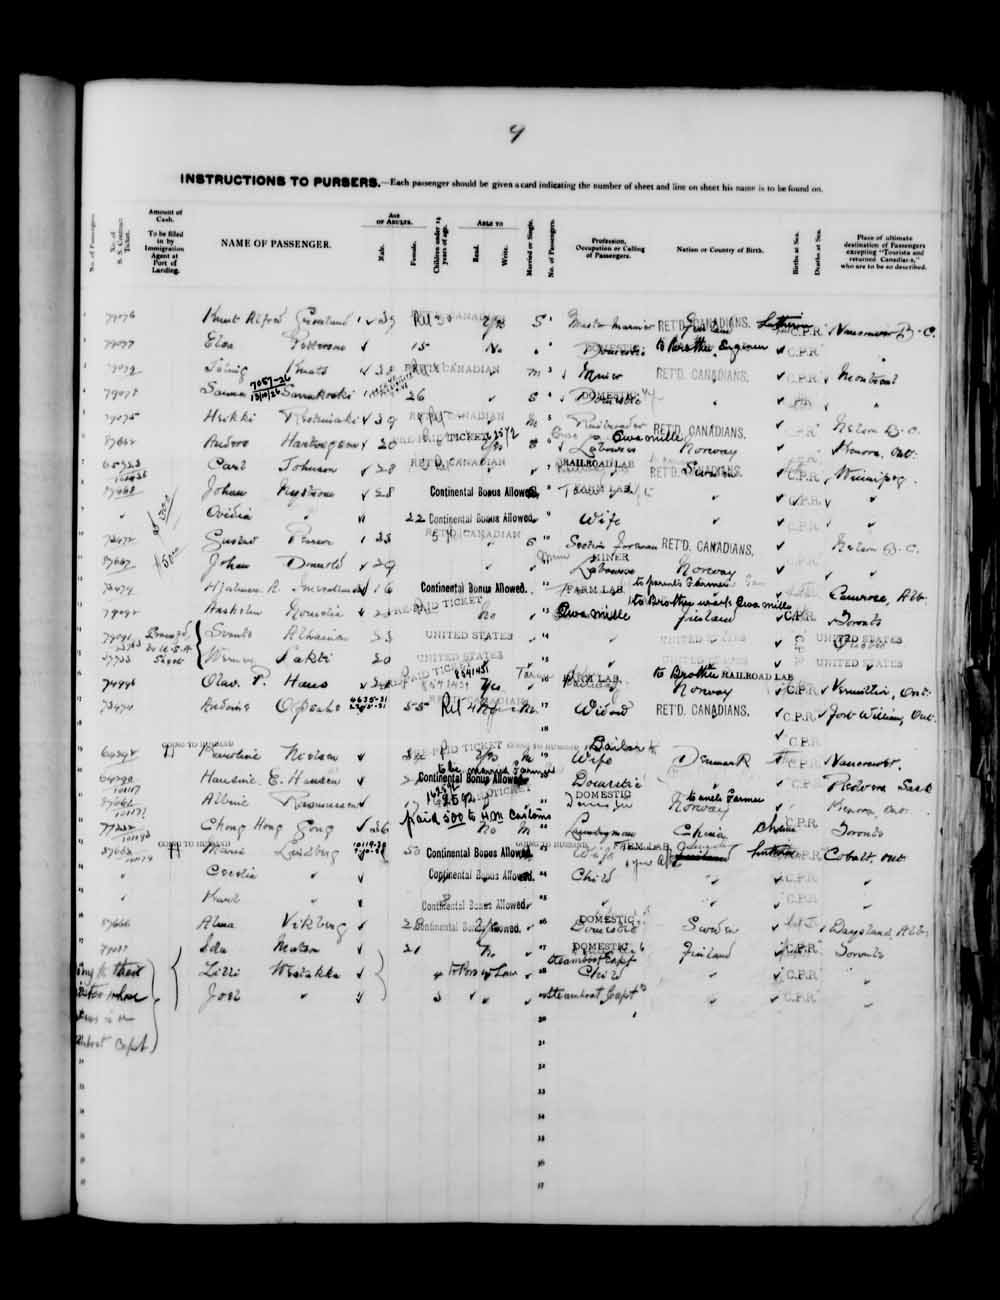 Digitized page of Quebec Passenger Lists for Image No.: e003591580